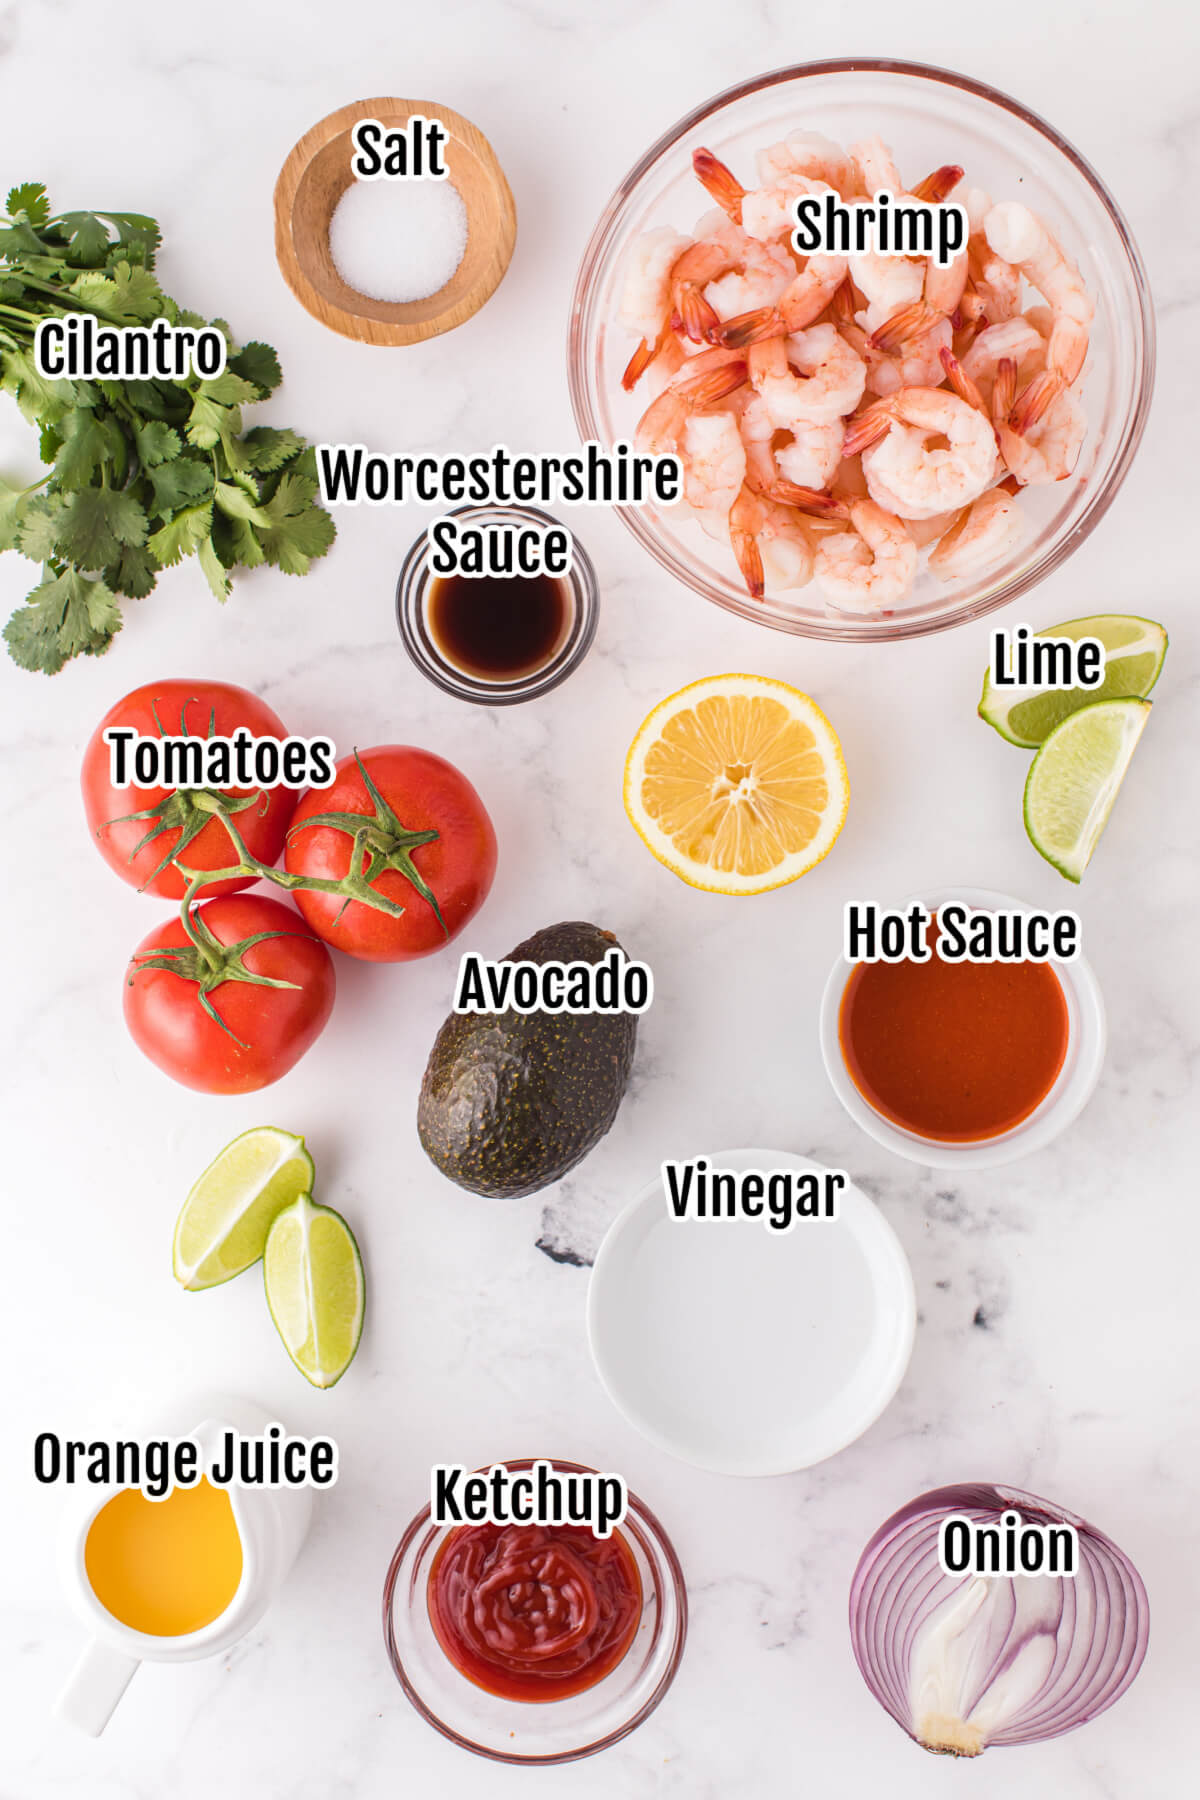 Image of the ingredients for shrimp ceviche. 